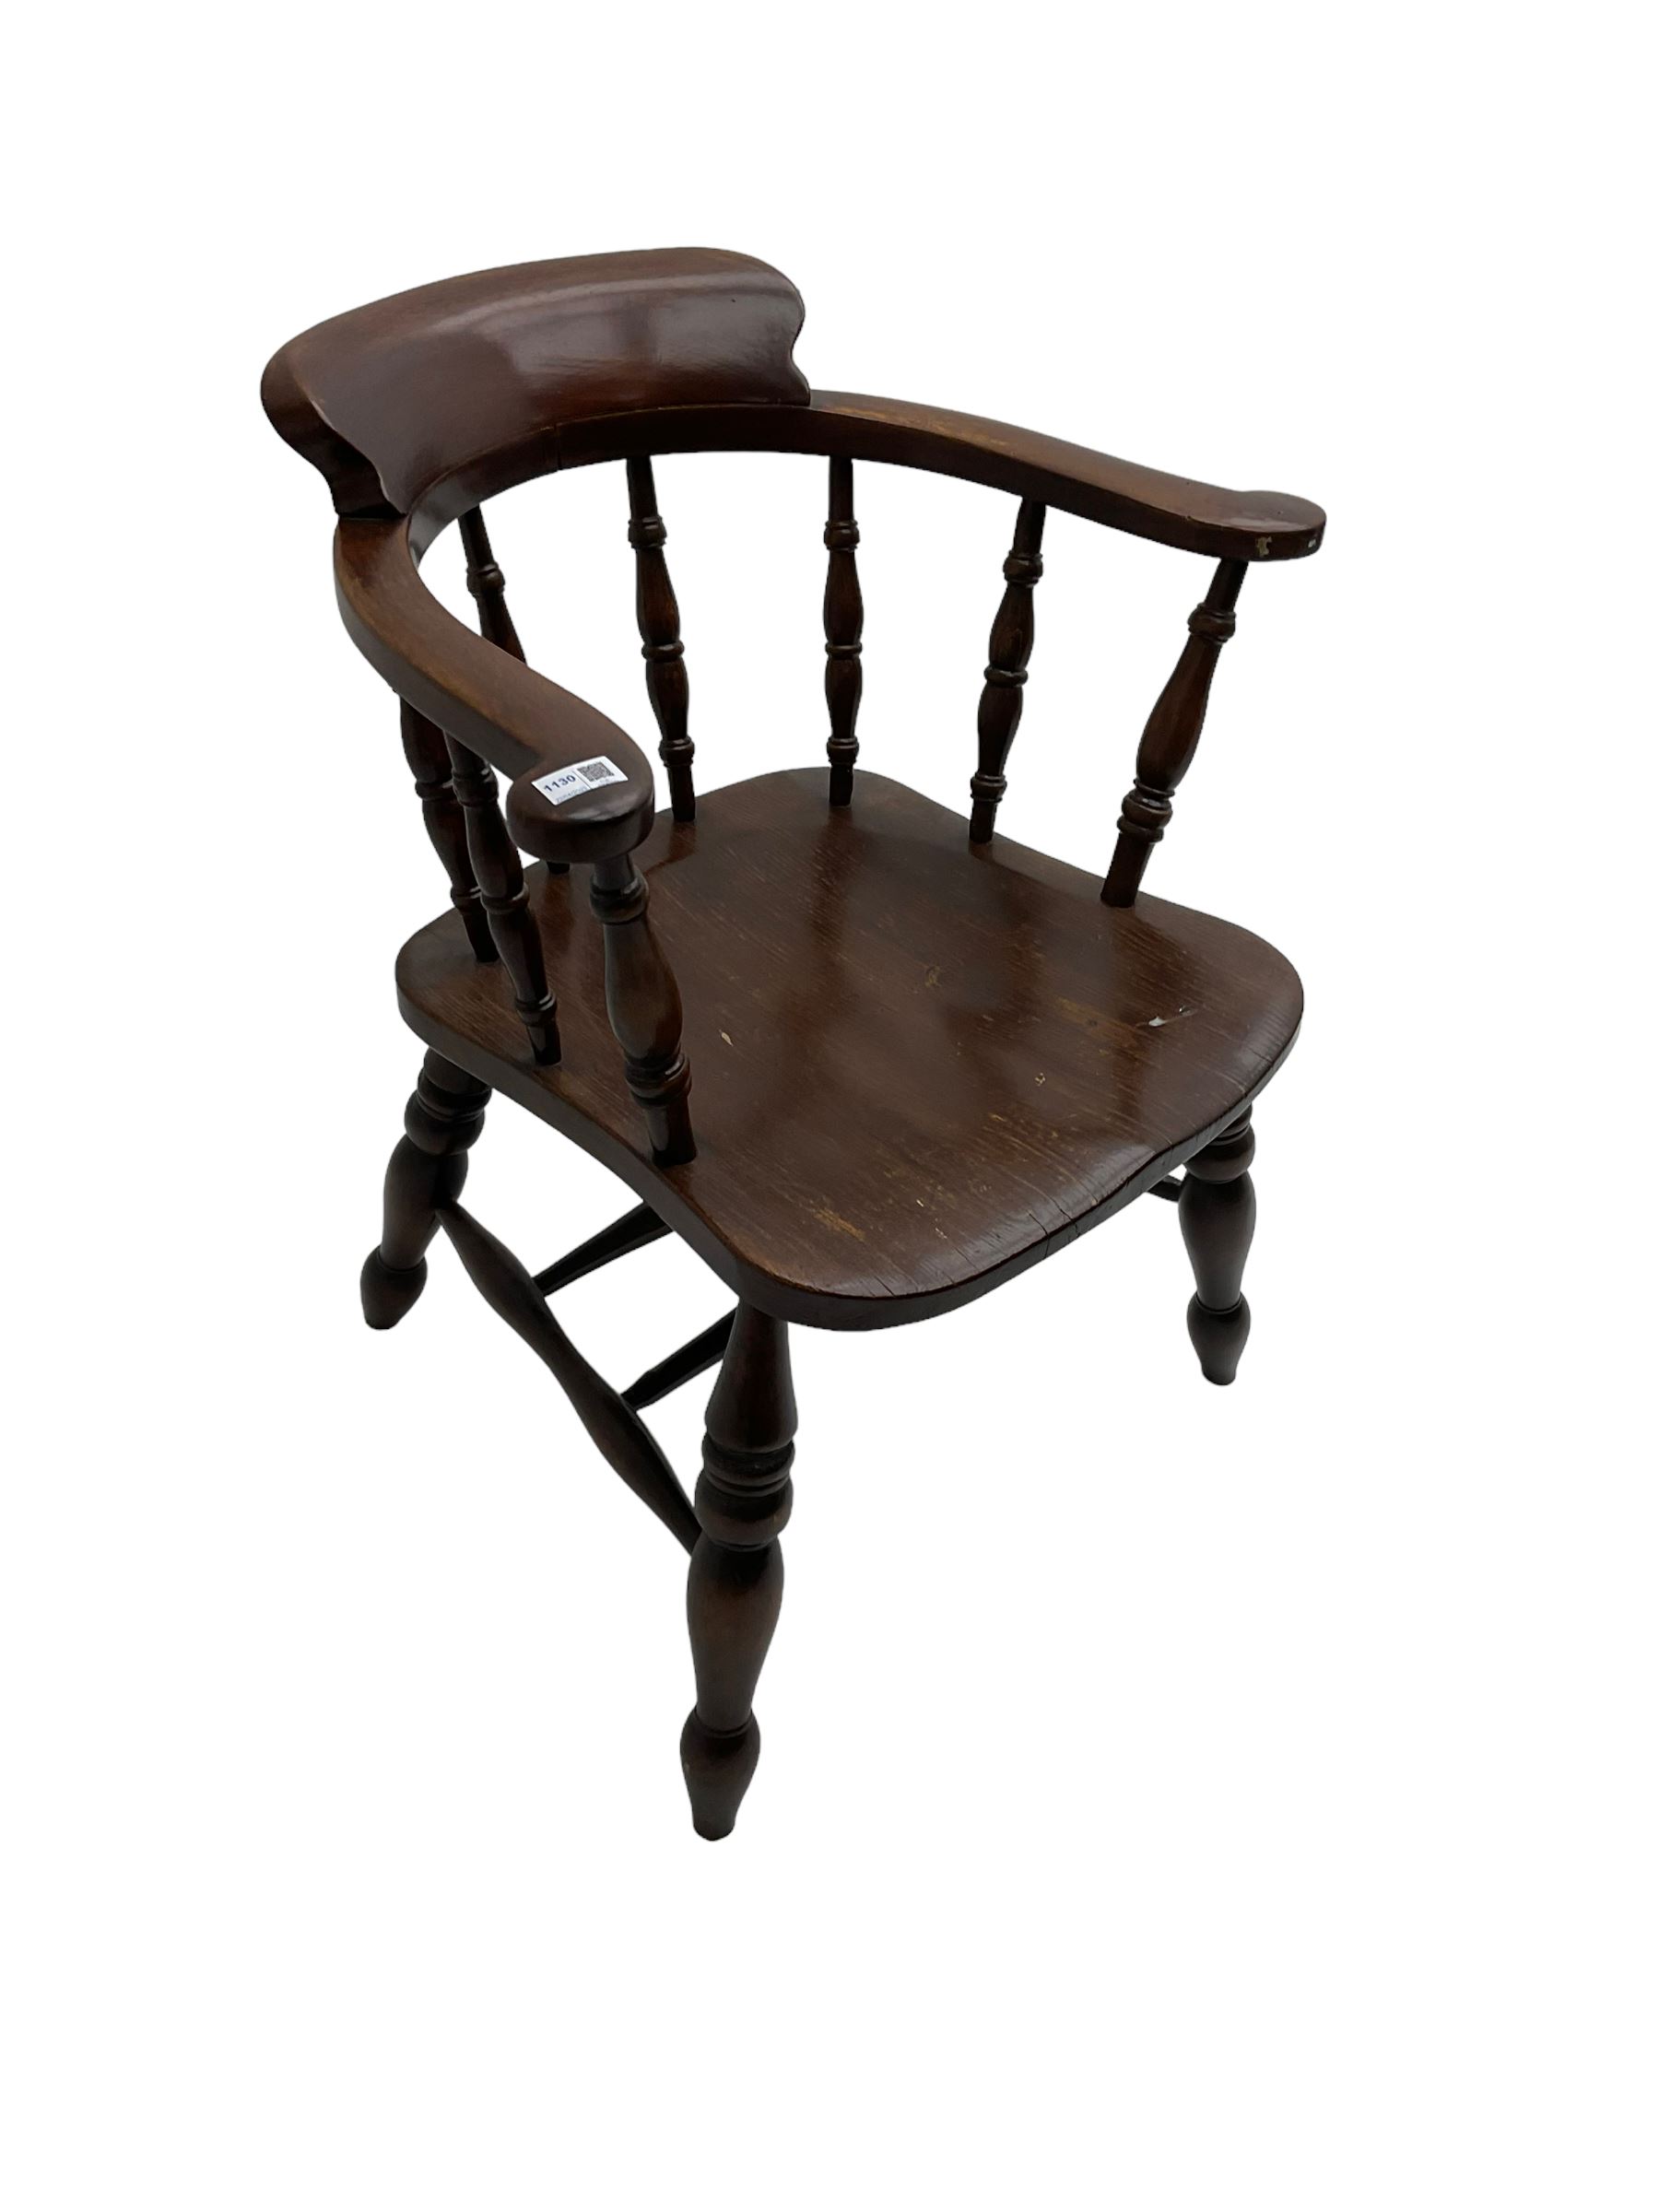 20th century elm and beech Captain's elbow chair - Image 4 of 6